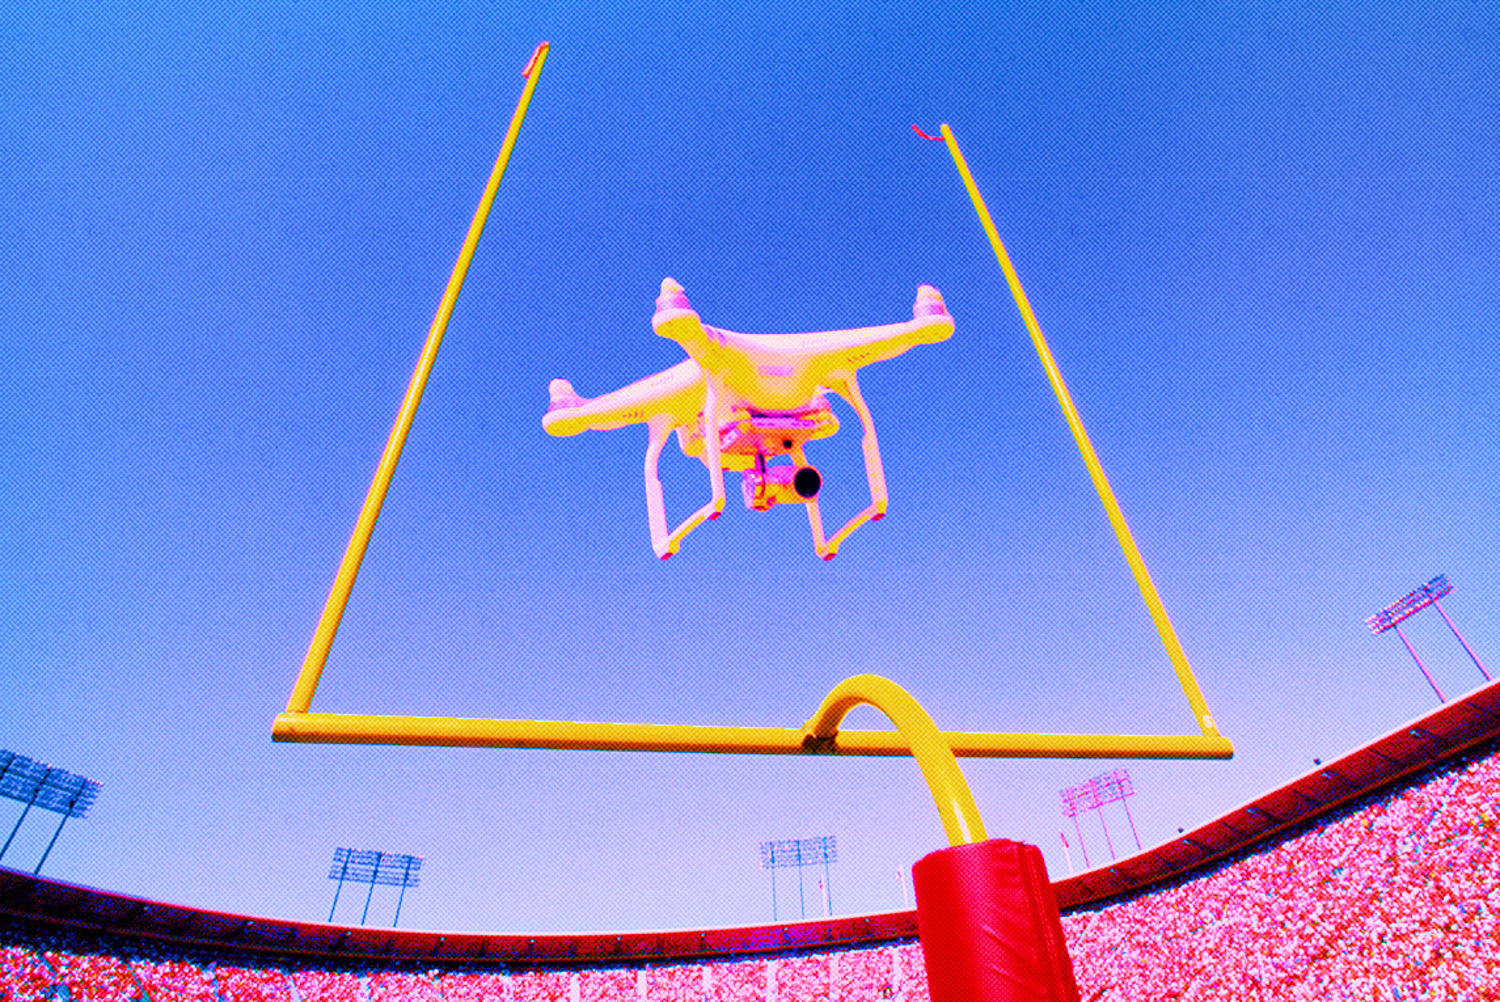 Super Bowl security prepares for drones with trackers and jammers